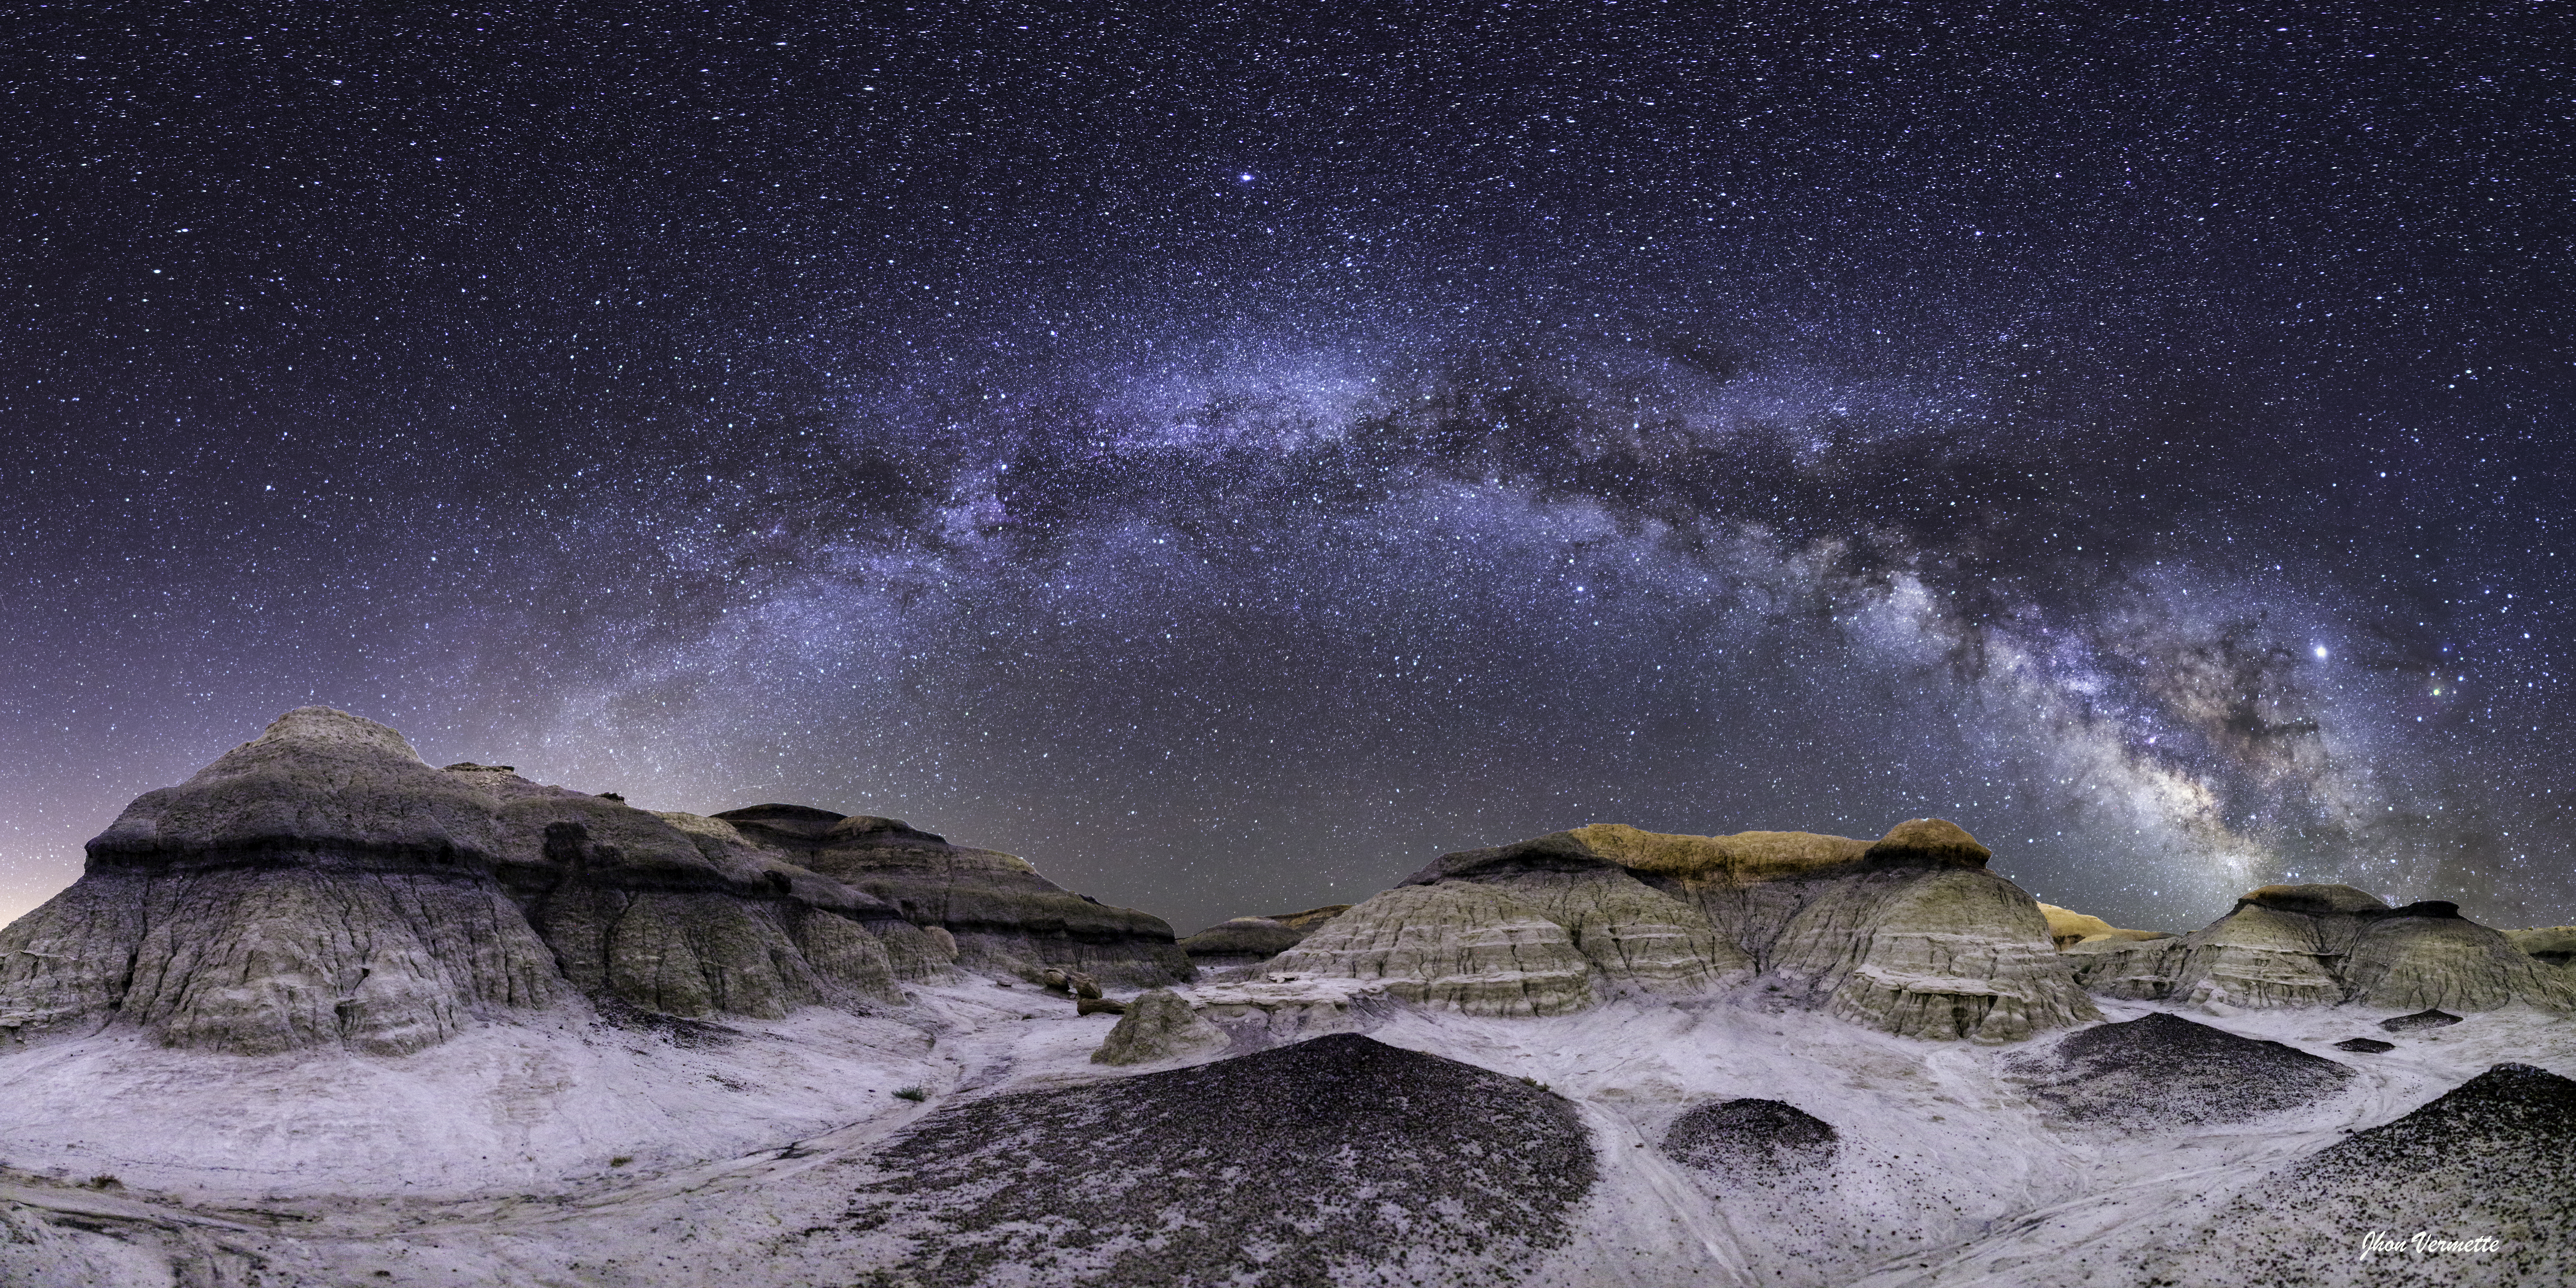 20x40 Metal Print of the Milky Way over Bisti Badlands in New Mexico